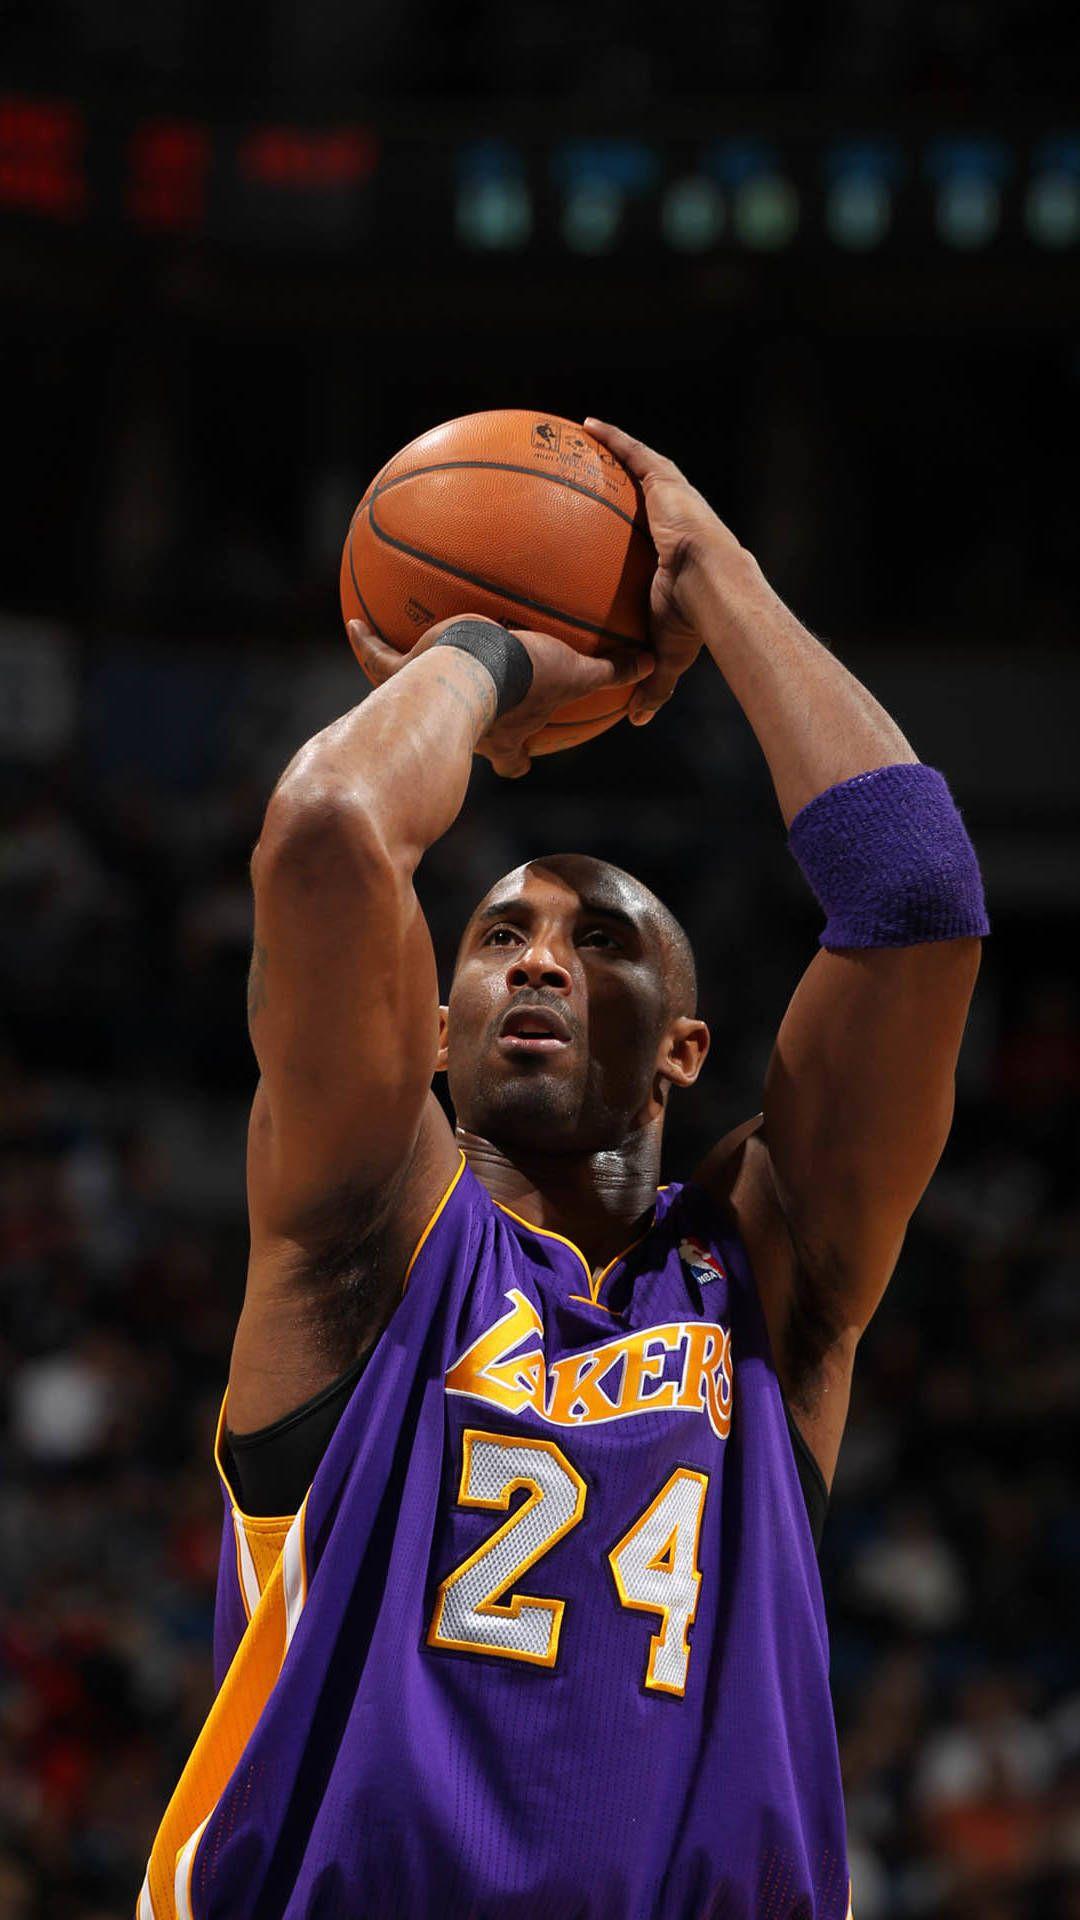 A man in purple and yellow basketball uniform holding up the ball - Kobe Bryant